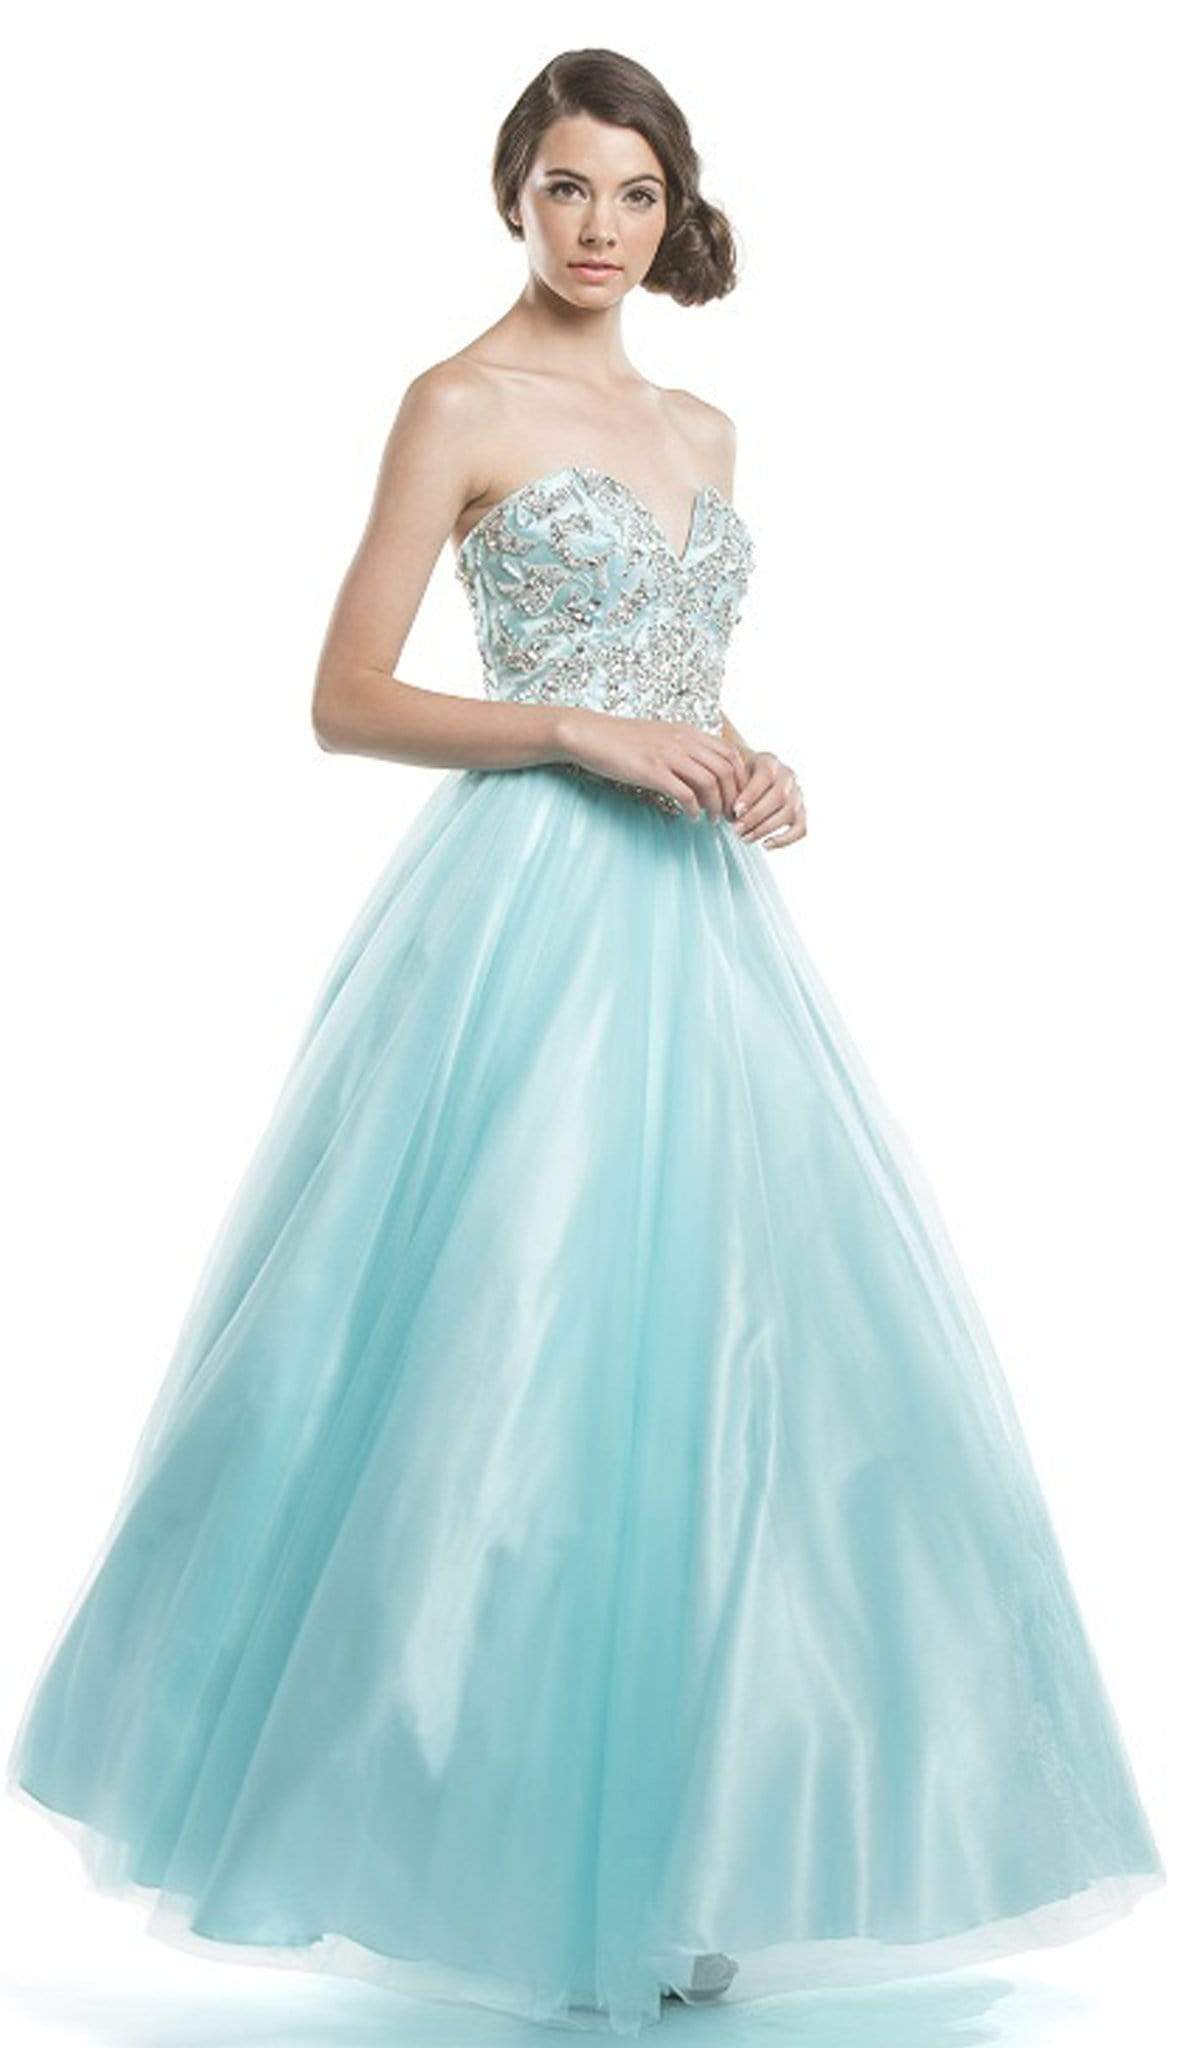 Image of Aspeed Design - Crystal Embellished Strapless Evening Gown